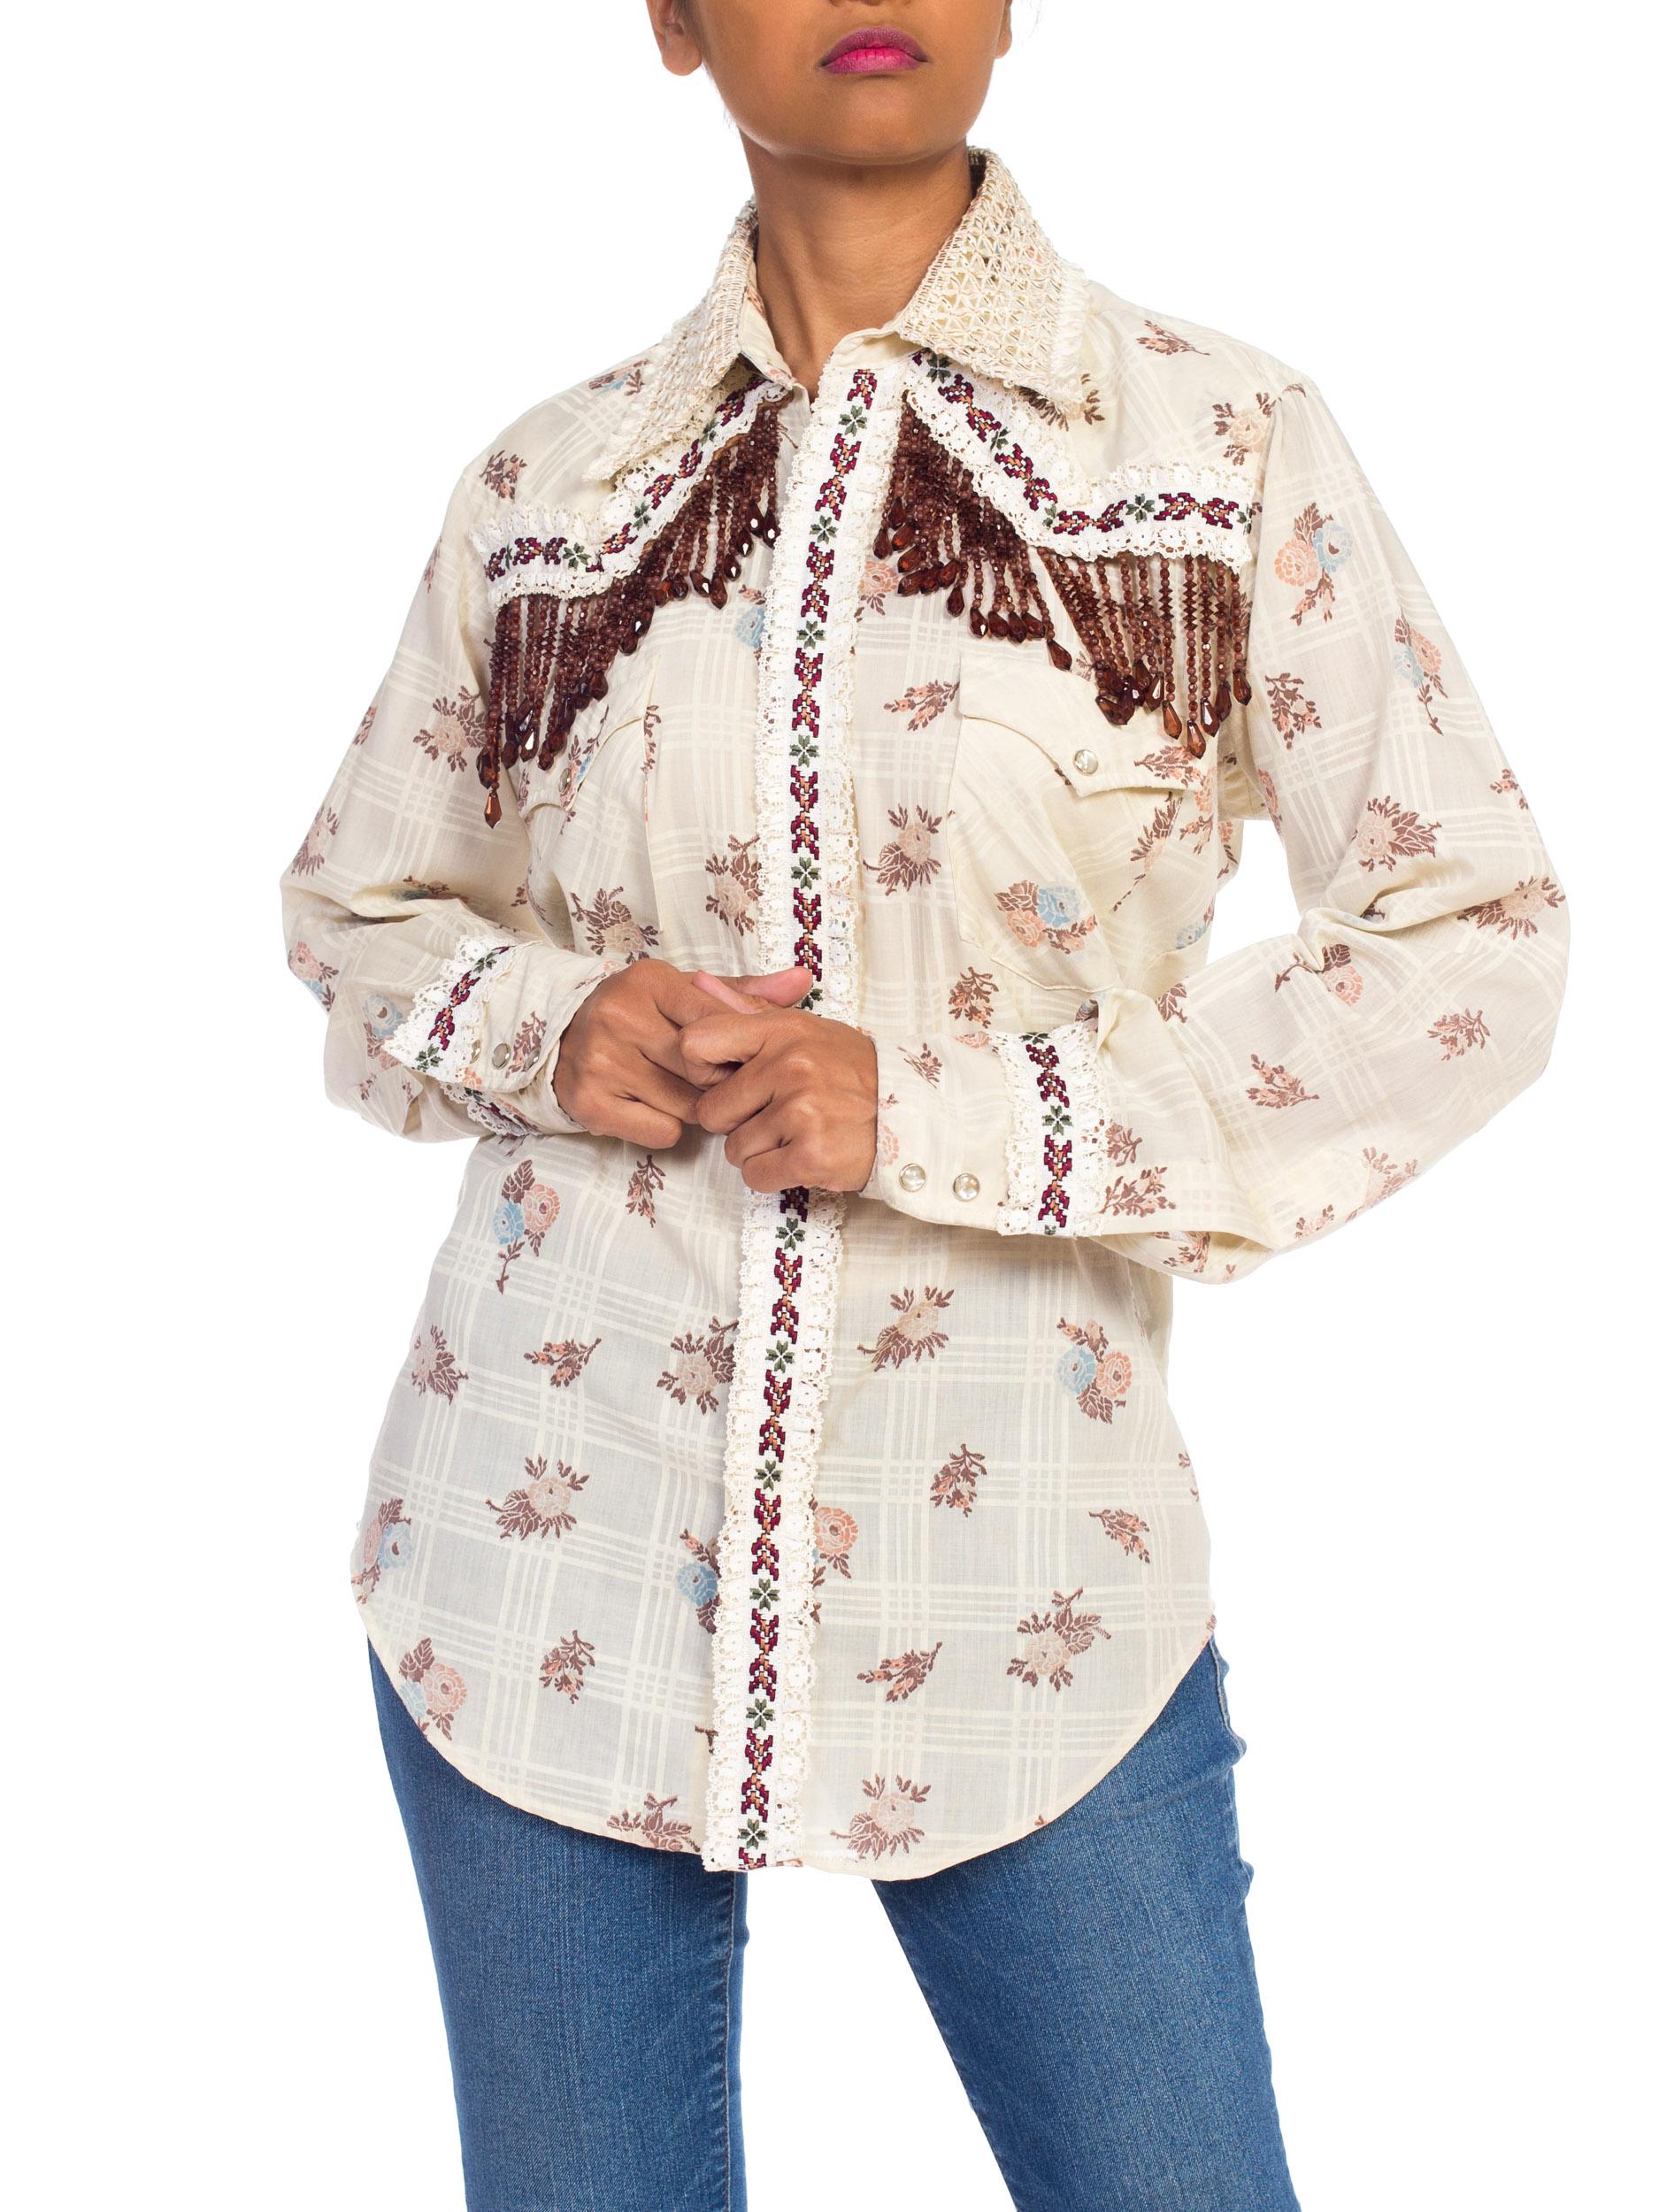 1970s Wrangler Floral Print Western Top With Lace and Ribbon 9